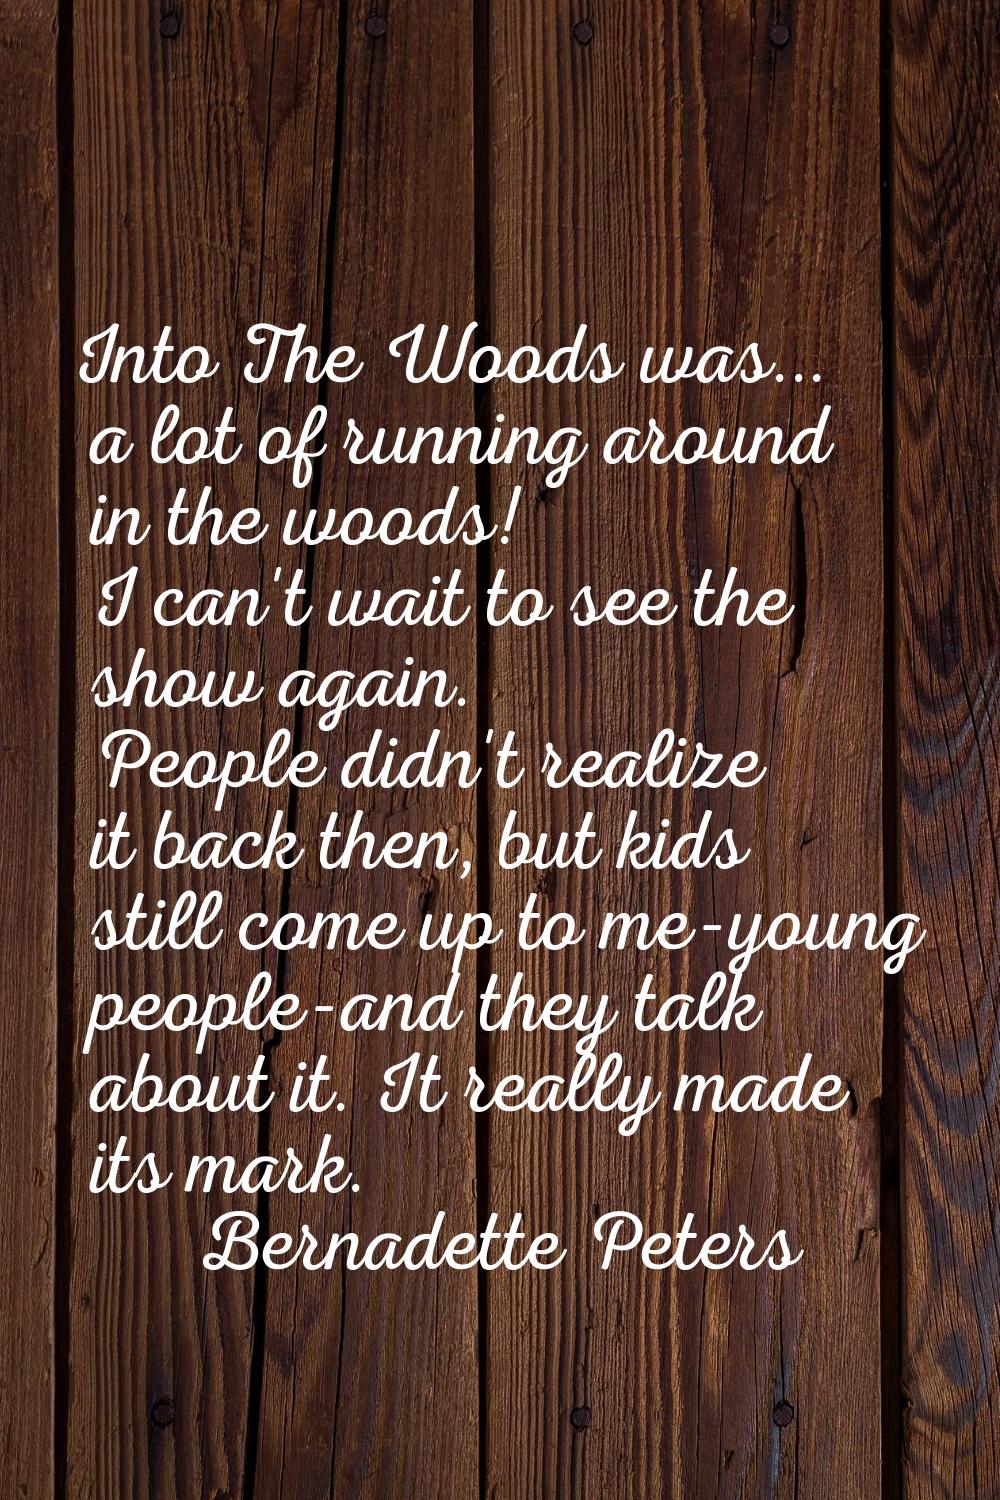 Into The Woods was... a lot of running around in the woods! I can't wait to see the show again. Peo